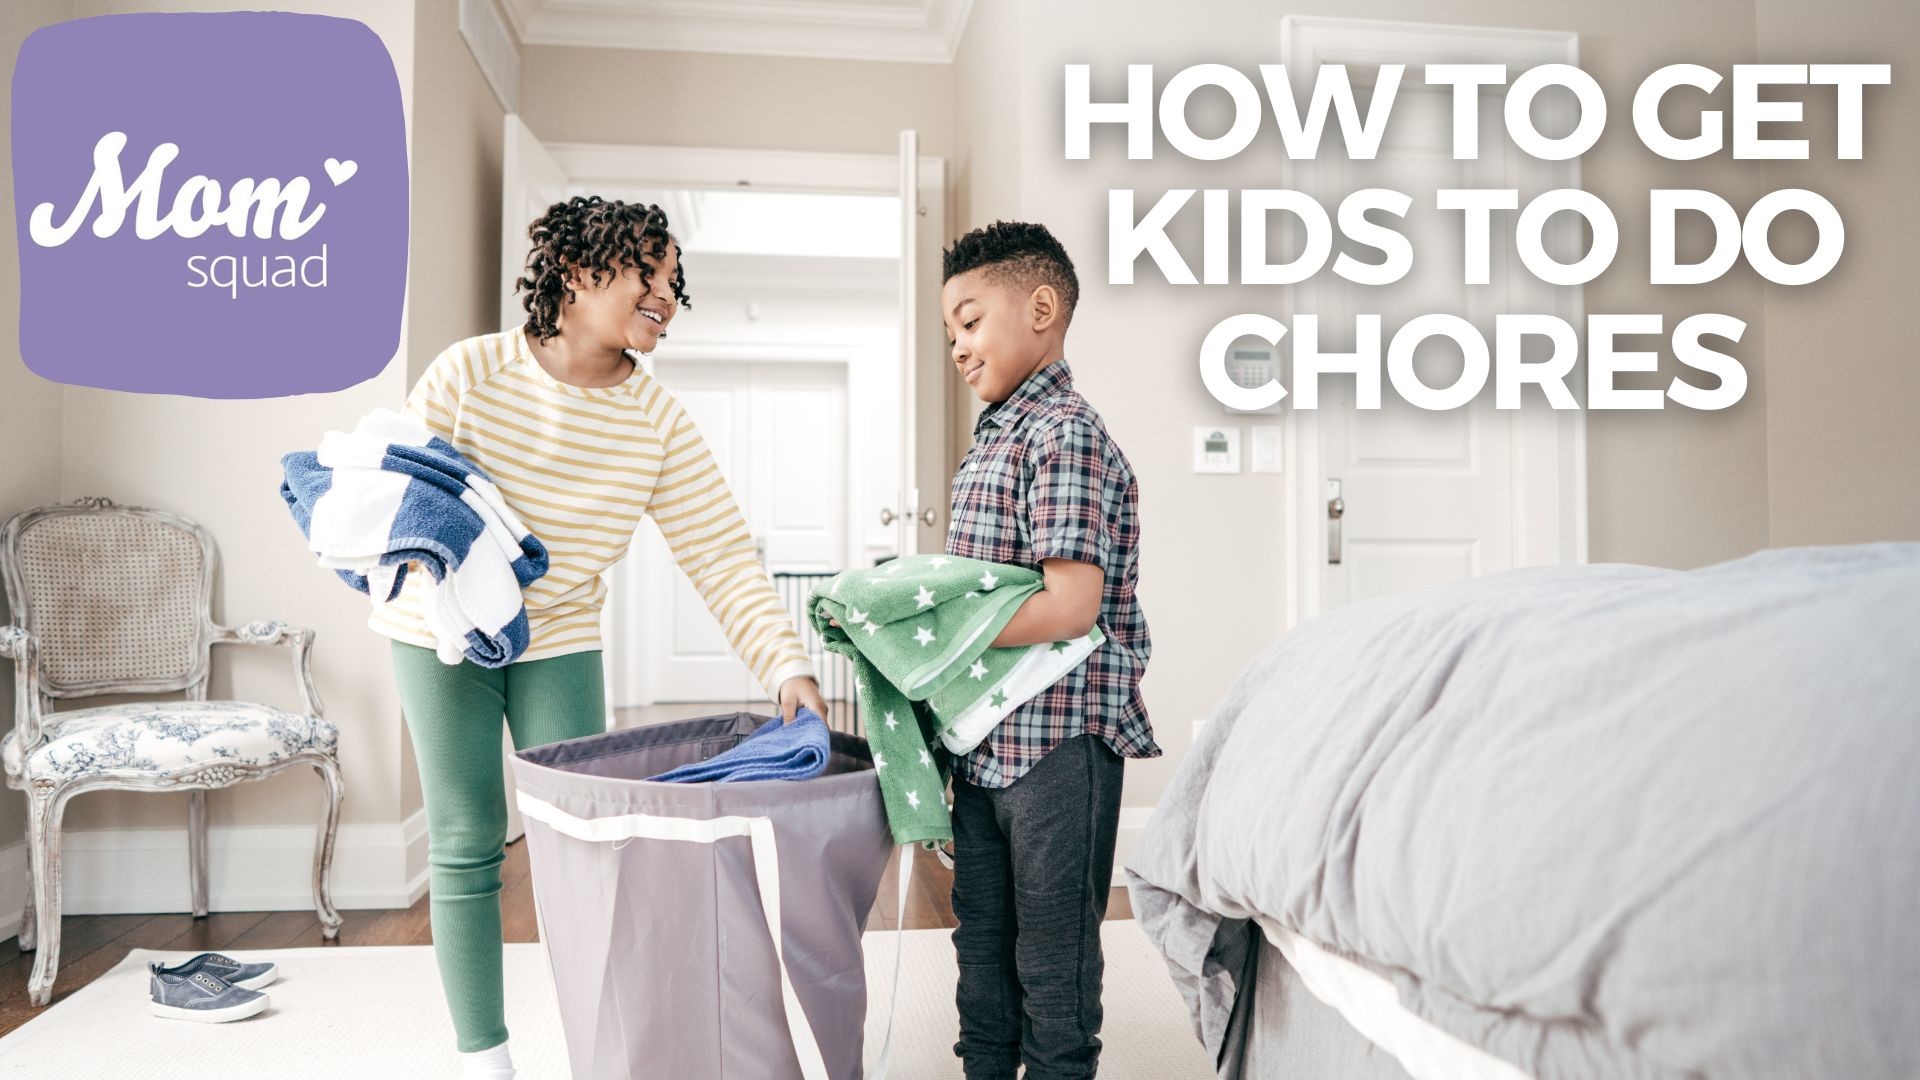 Maureen Kyle talks with an author and family coach who says she cracked the code on getting kids to do chores. Her method to have kids help tackle the to-do list.